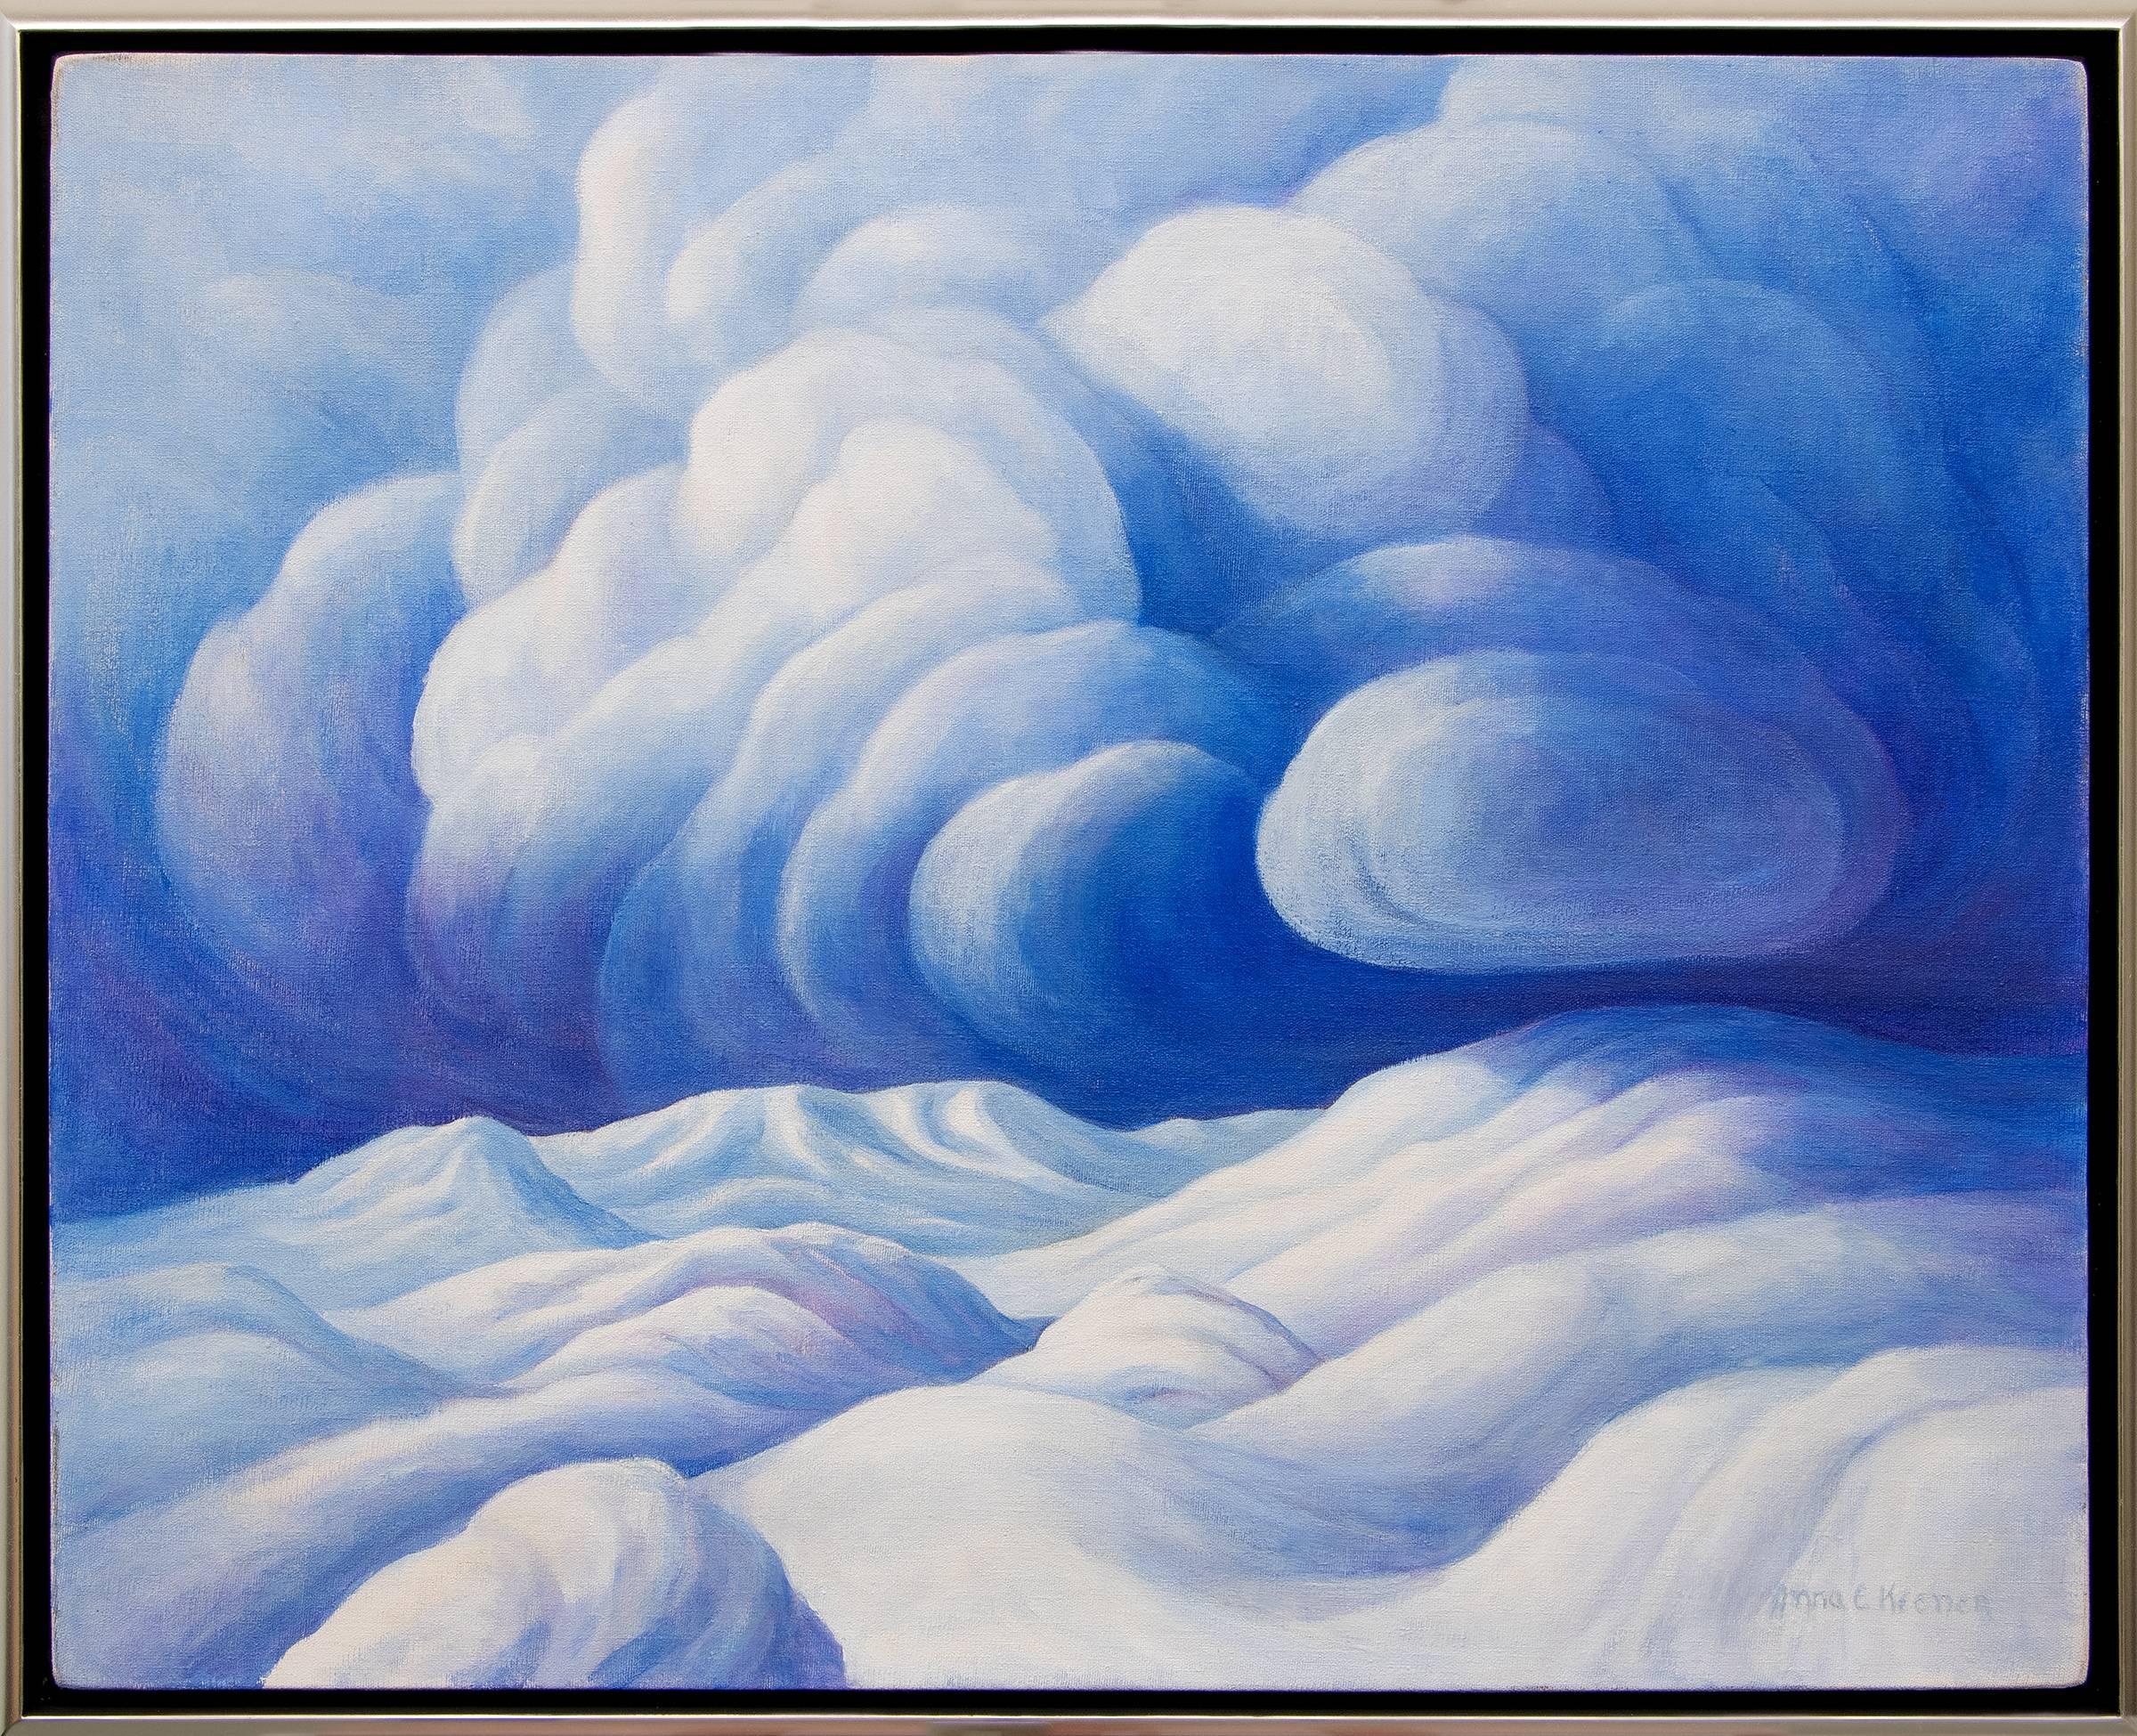 Snow Clouds (New Mexico) - Painting by Anna Keener